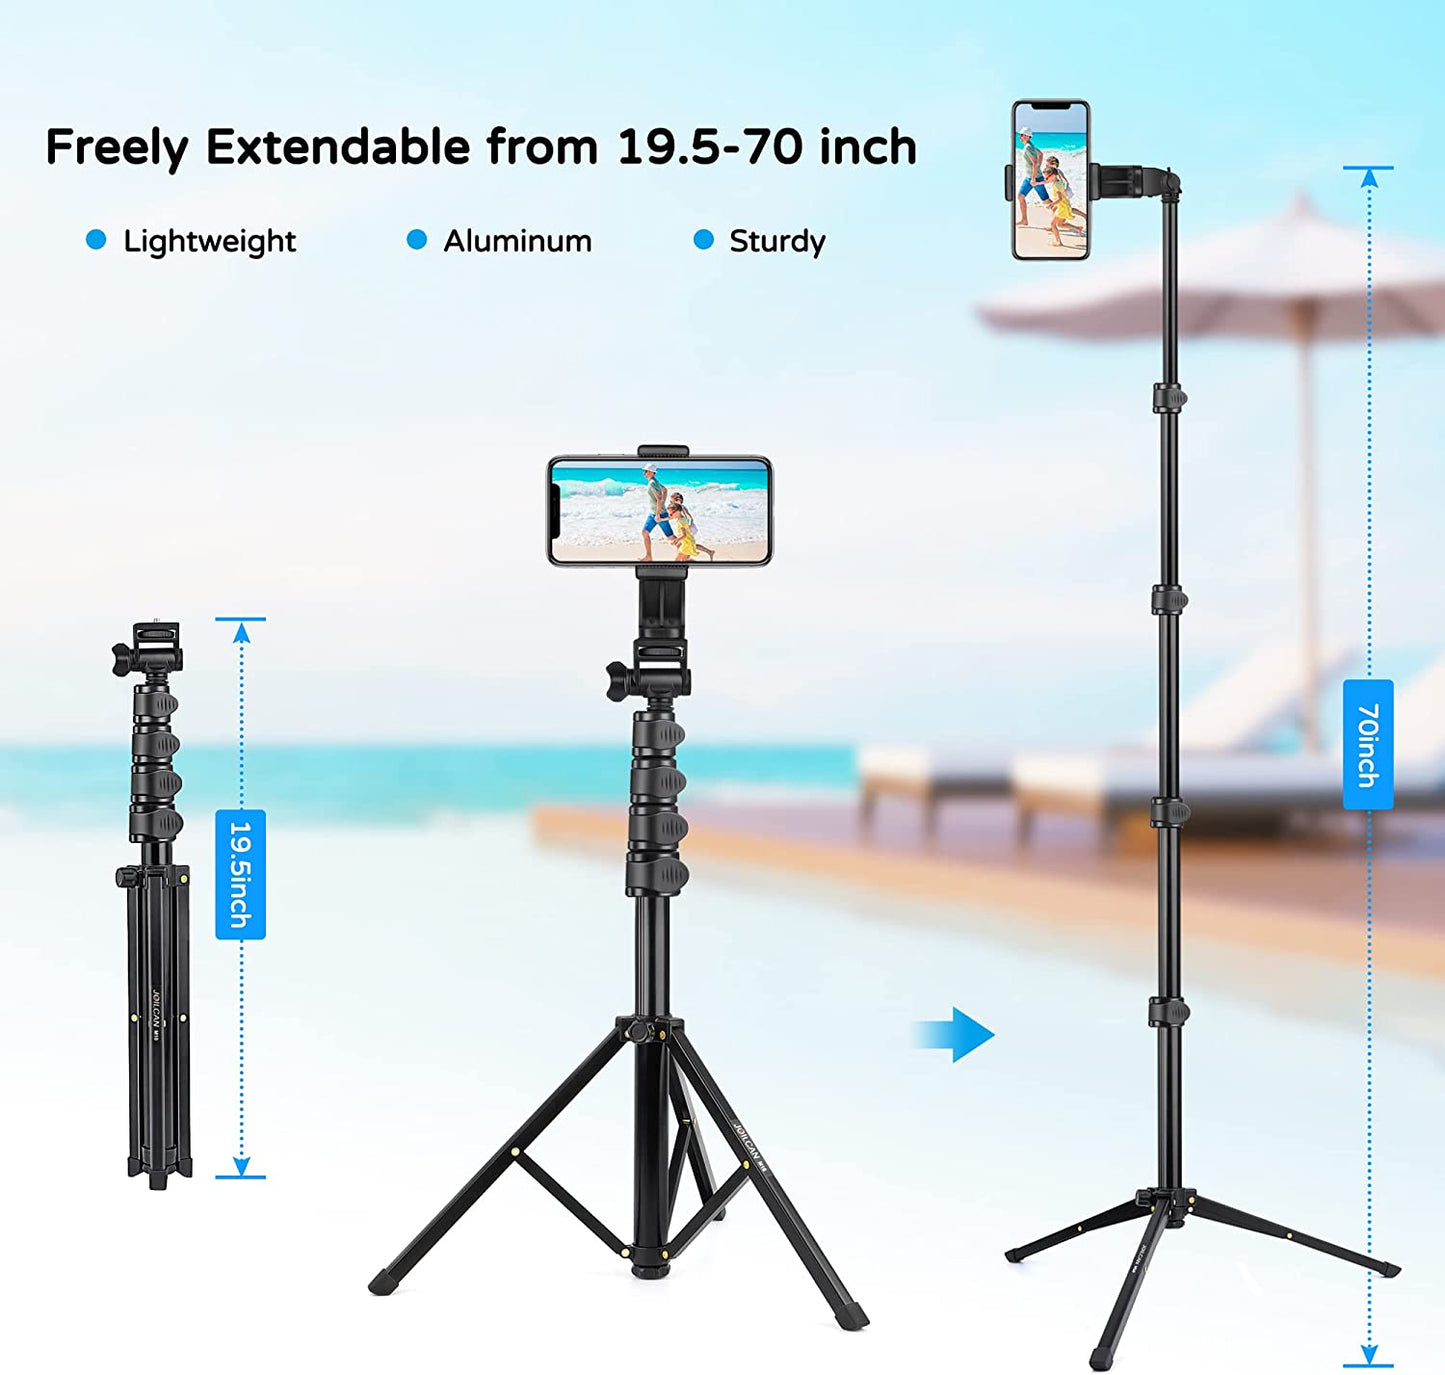 JOILCAN Phone Tripod, 70" Extendable Selfie Stick Tripod for iPhone with Wireless Remote Shutter, Lightweight Portable Camera Tripod with Phone Holder, Compatible with iOS/ Android/ Small Camera(EU)